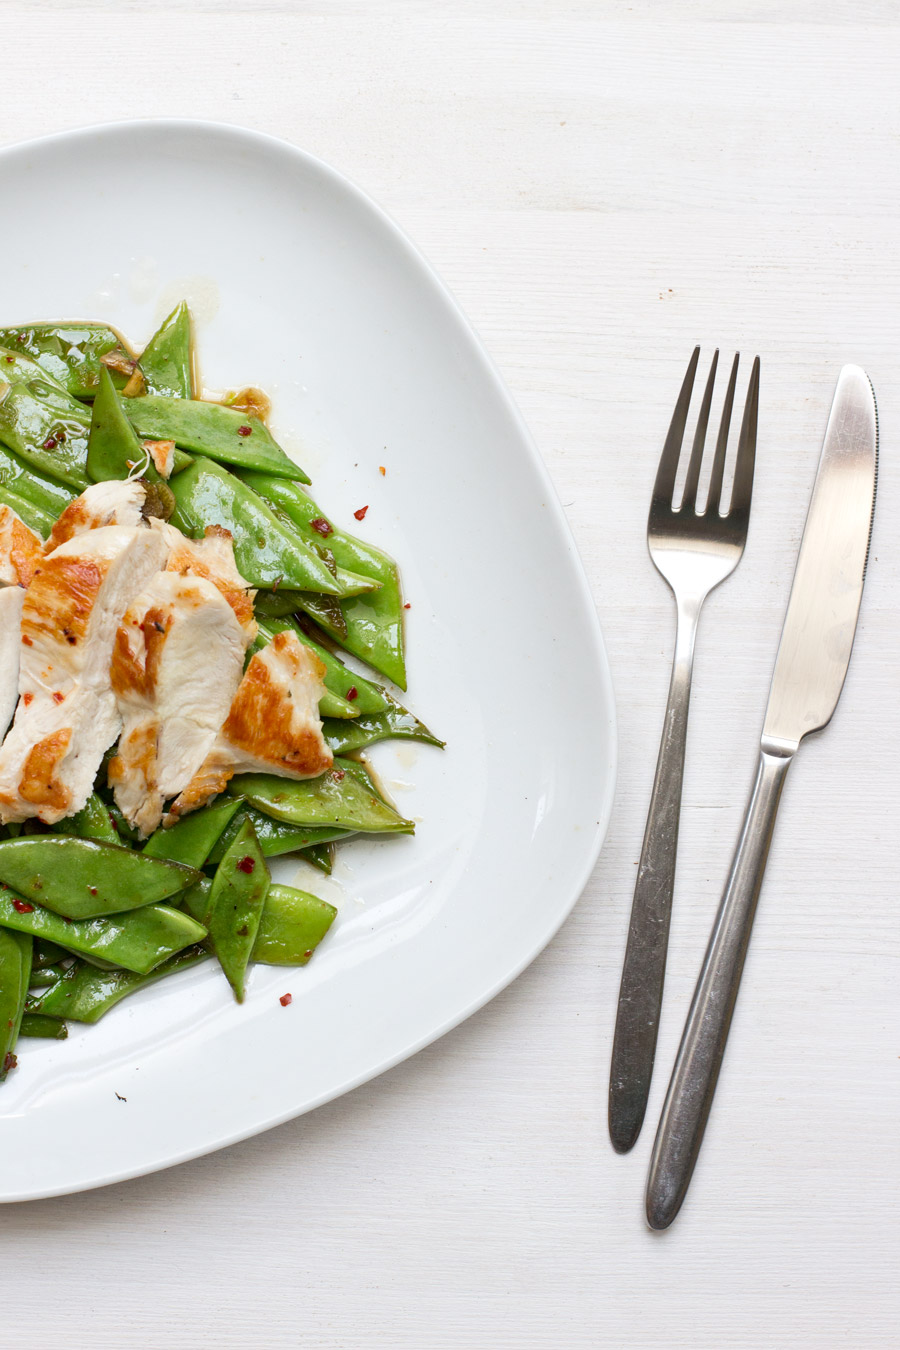 Quick (home) office lunch: roasted chicken with asian broad beans